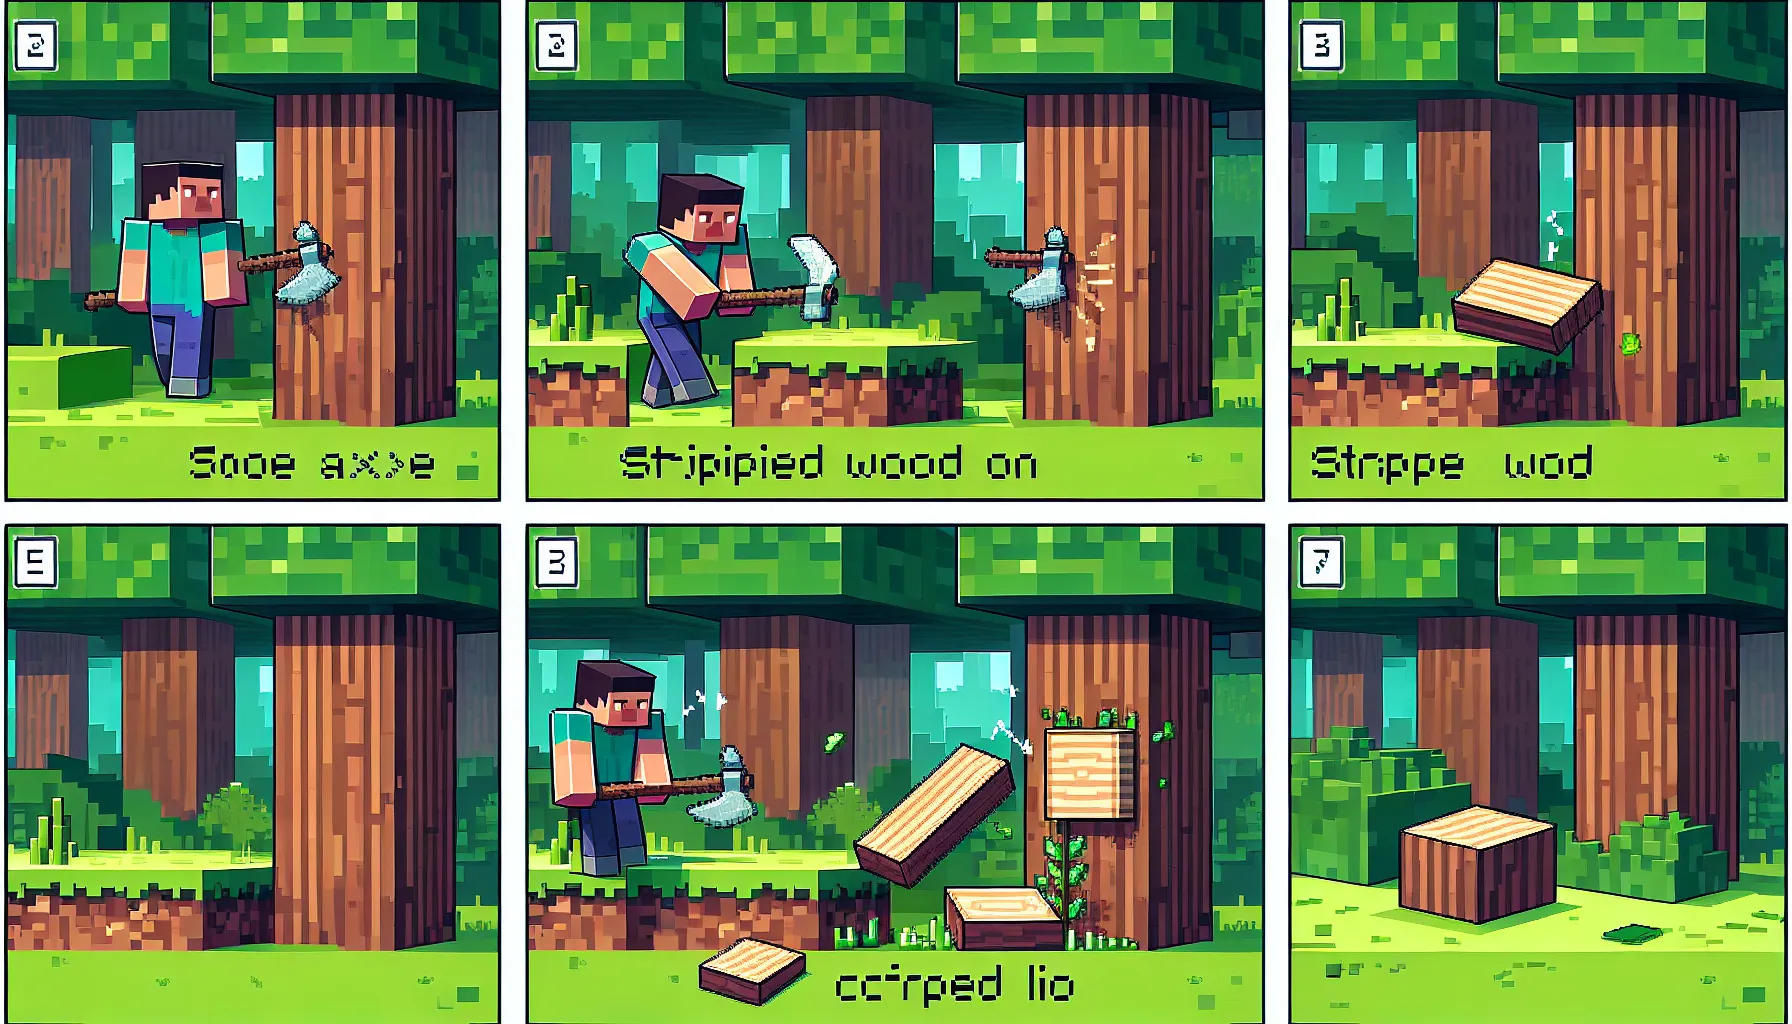 How to Make Stripped Wood in Minecraft